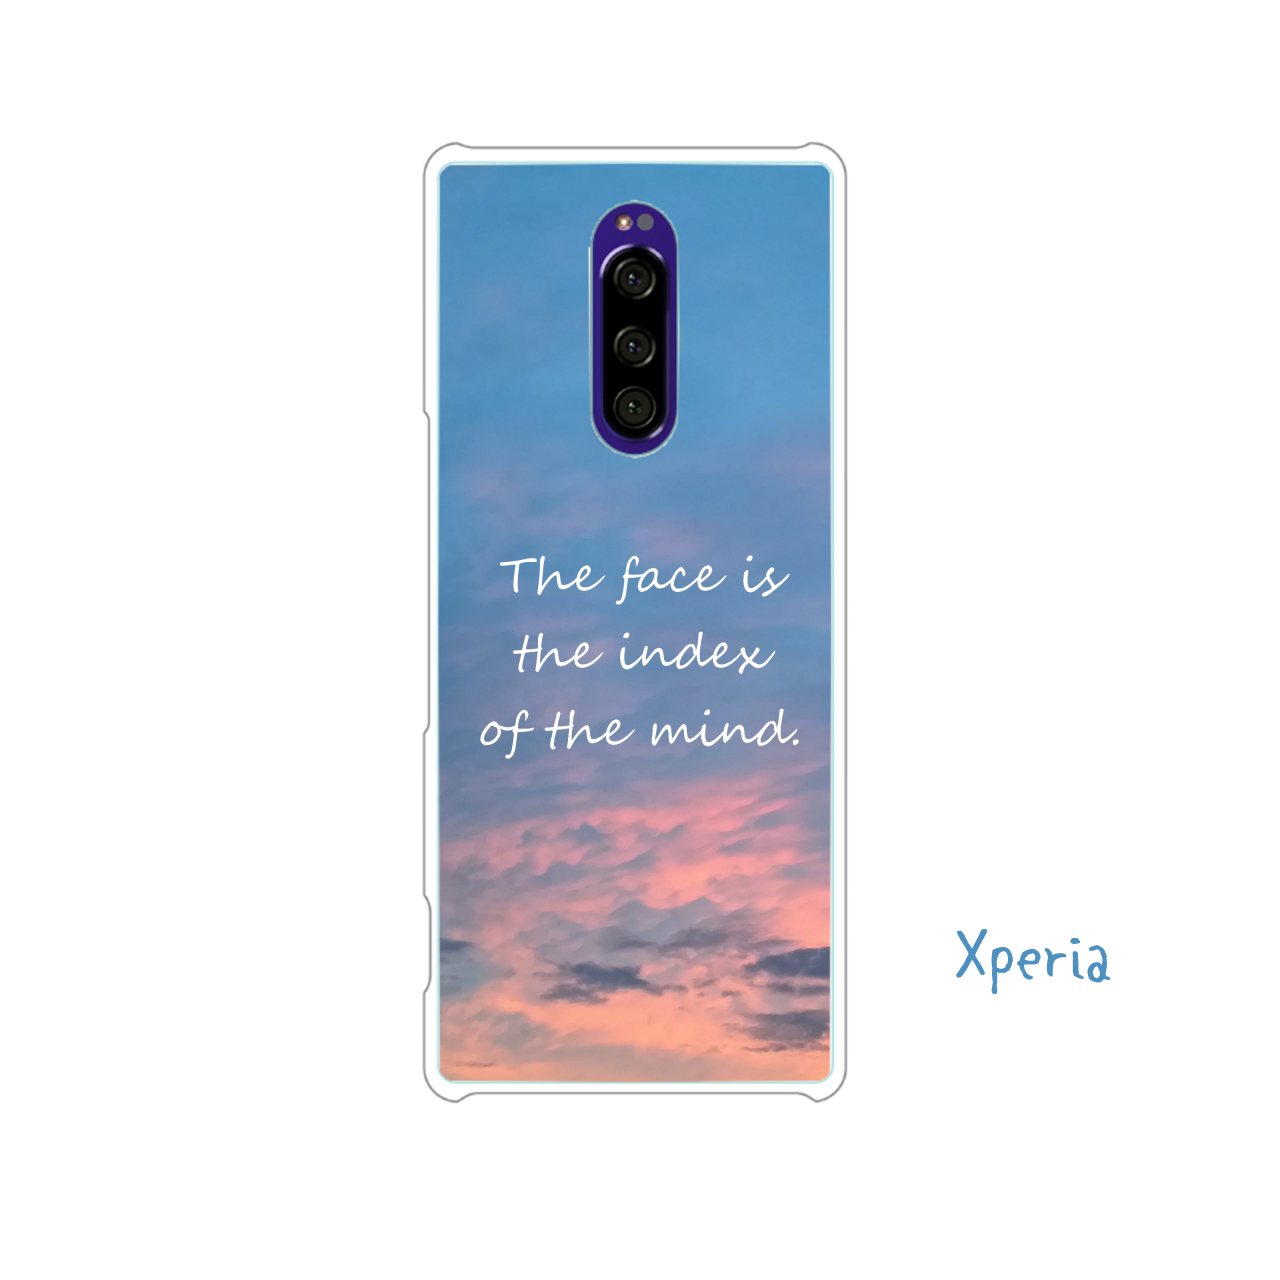 The face is the index of the mind. Xperia Z5 Premium(SO-03H)